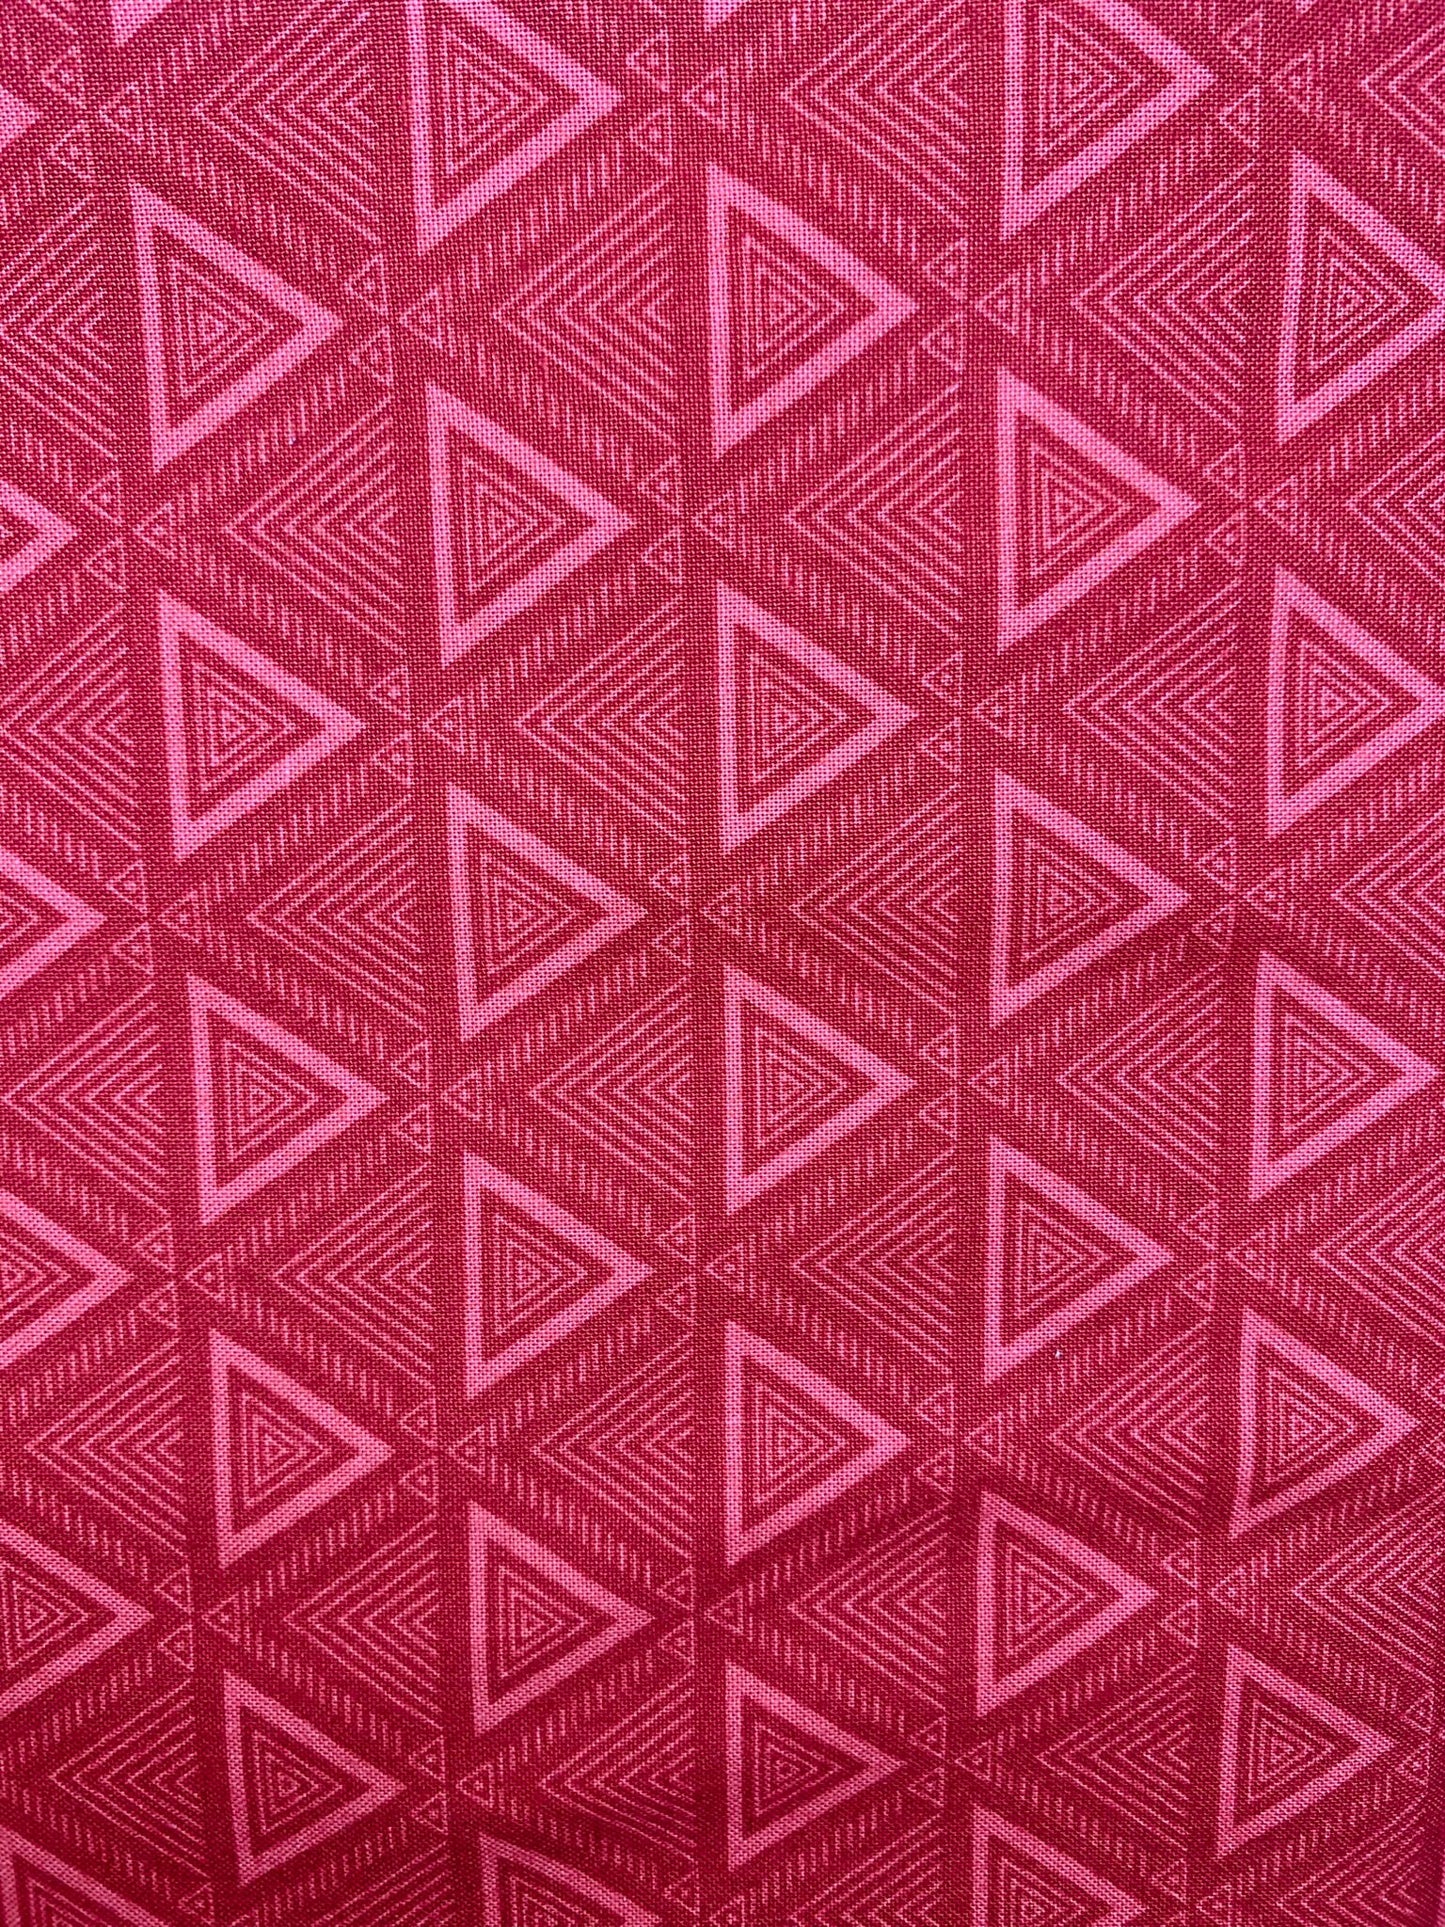 High Quality Quilting Fabric-- Hand Cut -Sold by the 1/2 Yard- Michael Miller Fabrics-100% Cotton Fabric. Color: Brick-Sold by the 1/2 Yard-